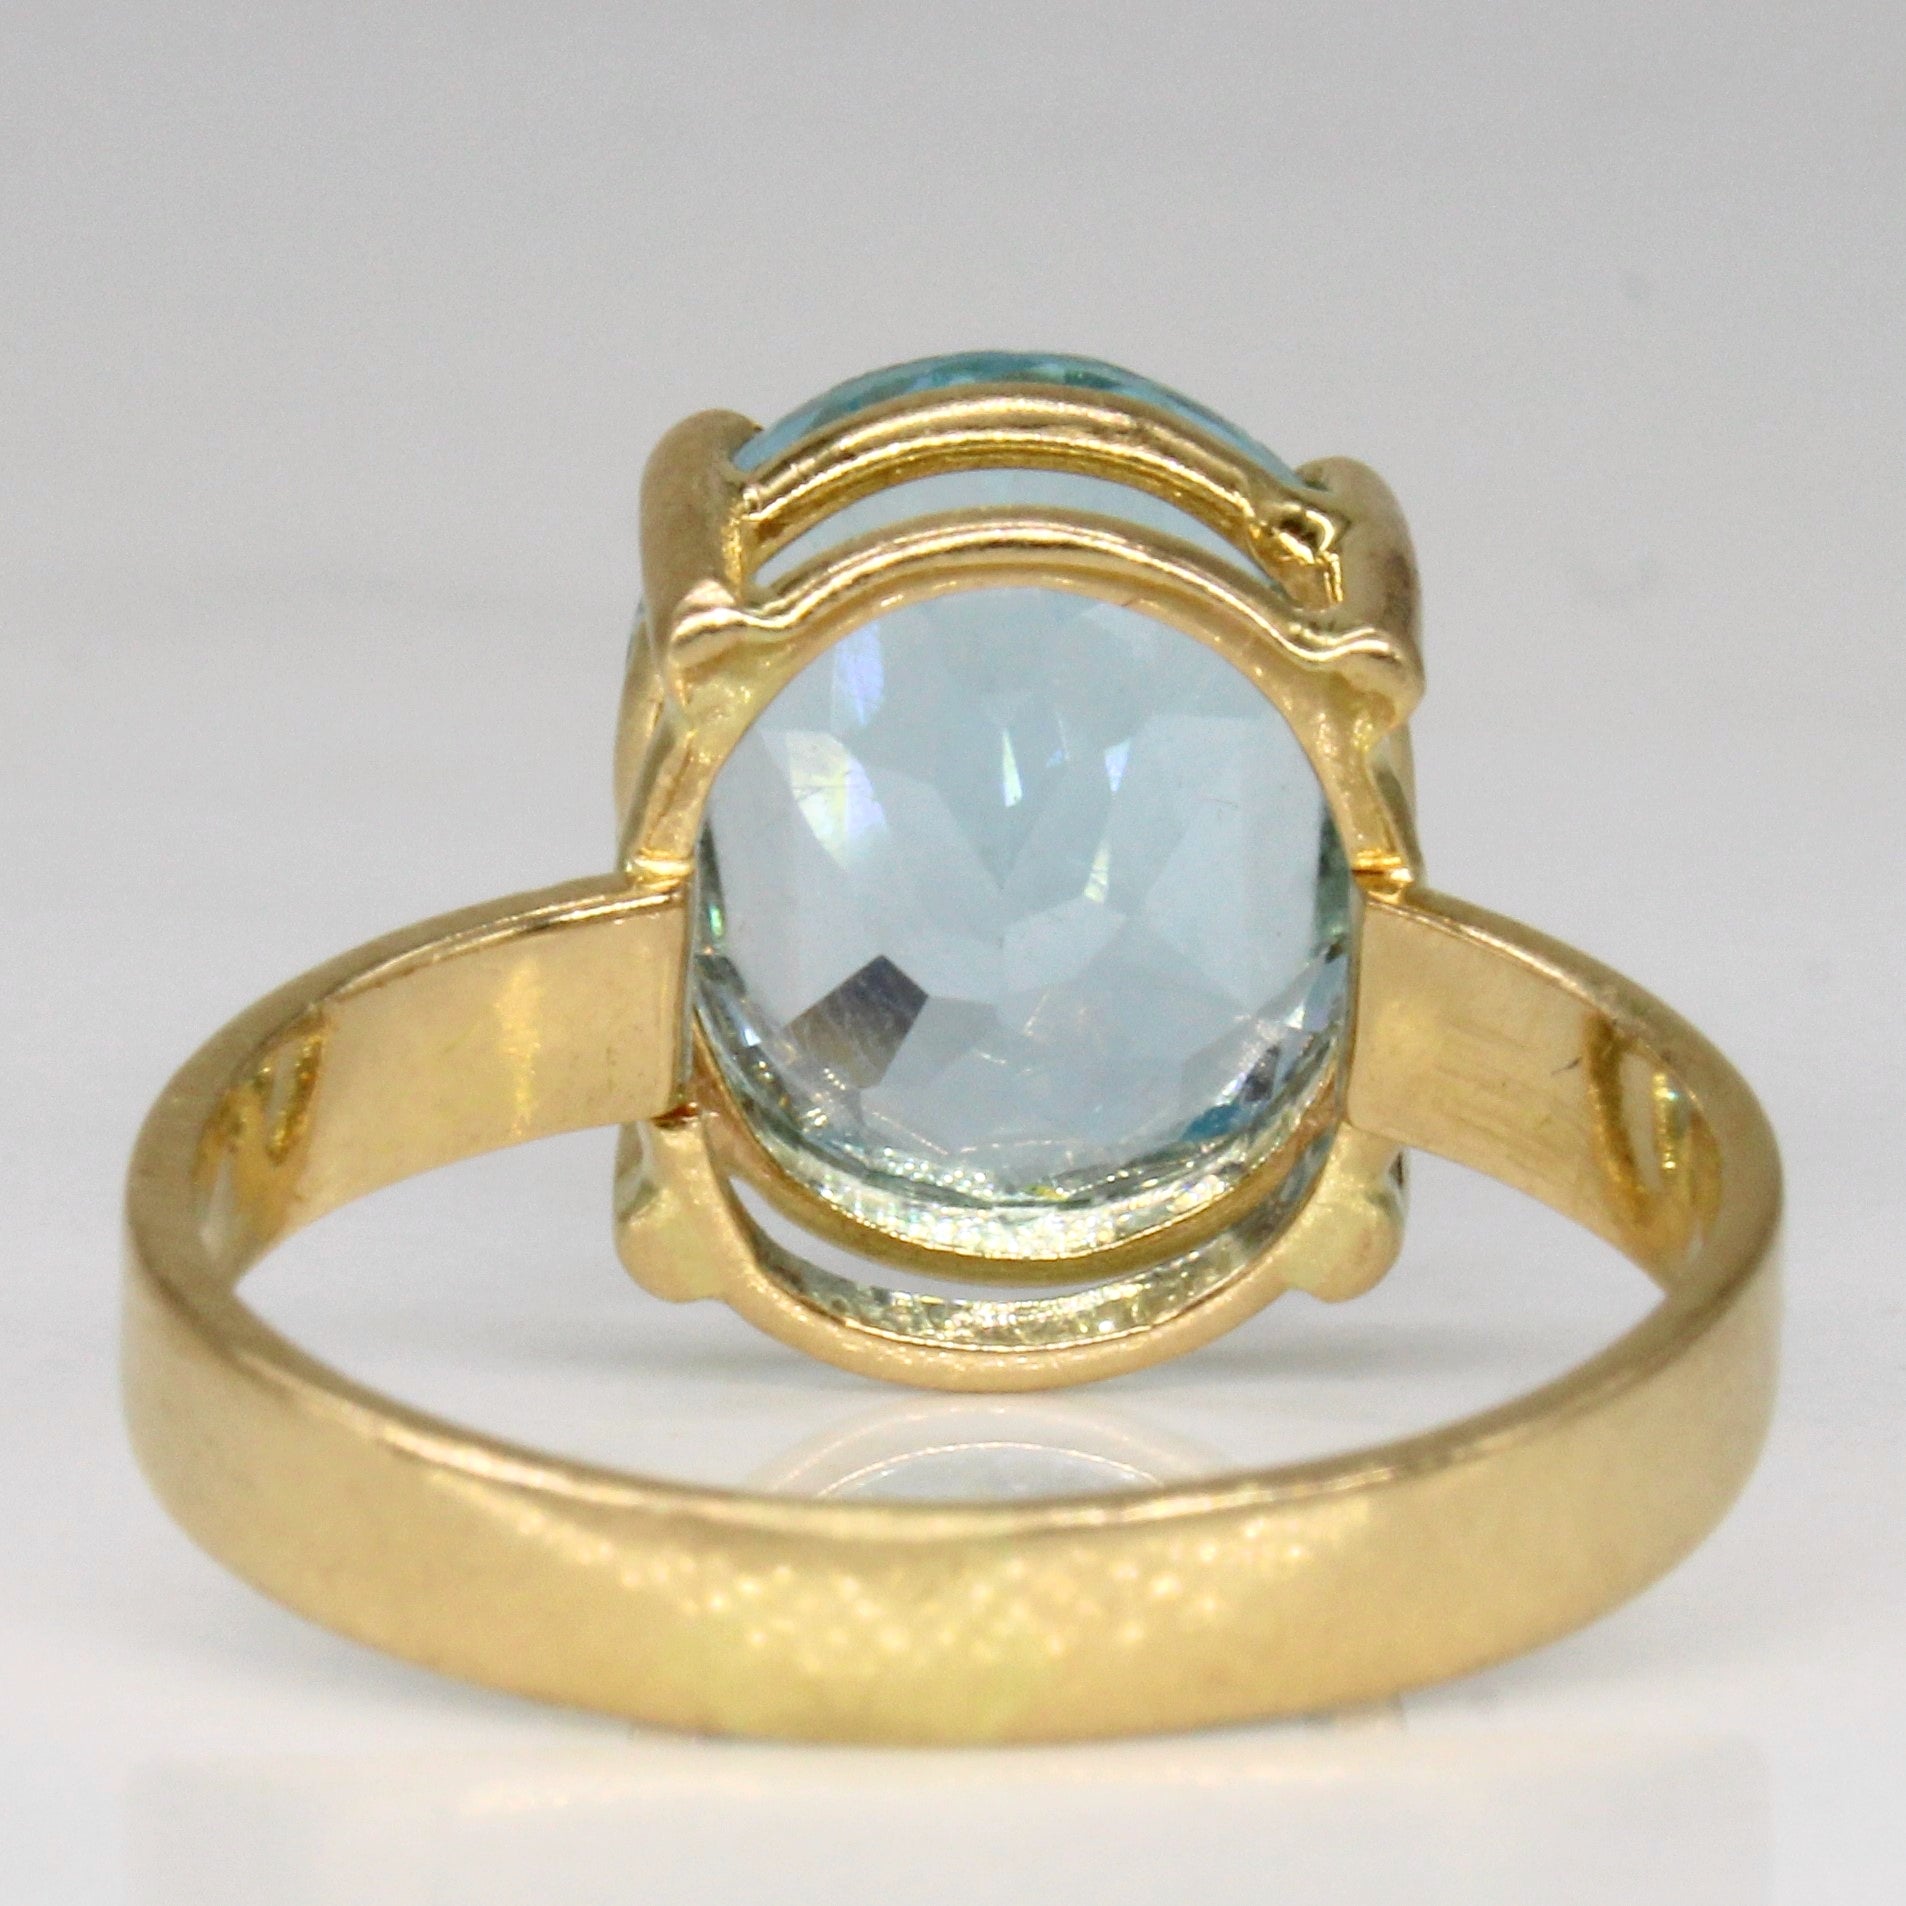 Oval Cut Blue Topaz Cocktail Ring | 5.40ct | SZ 6.75 |